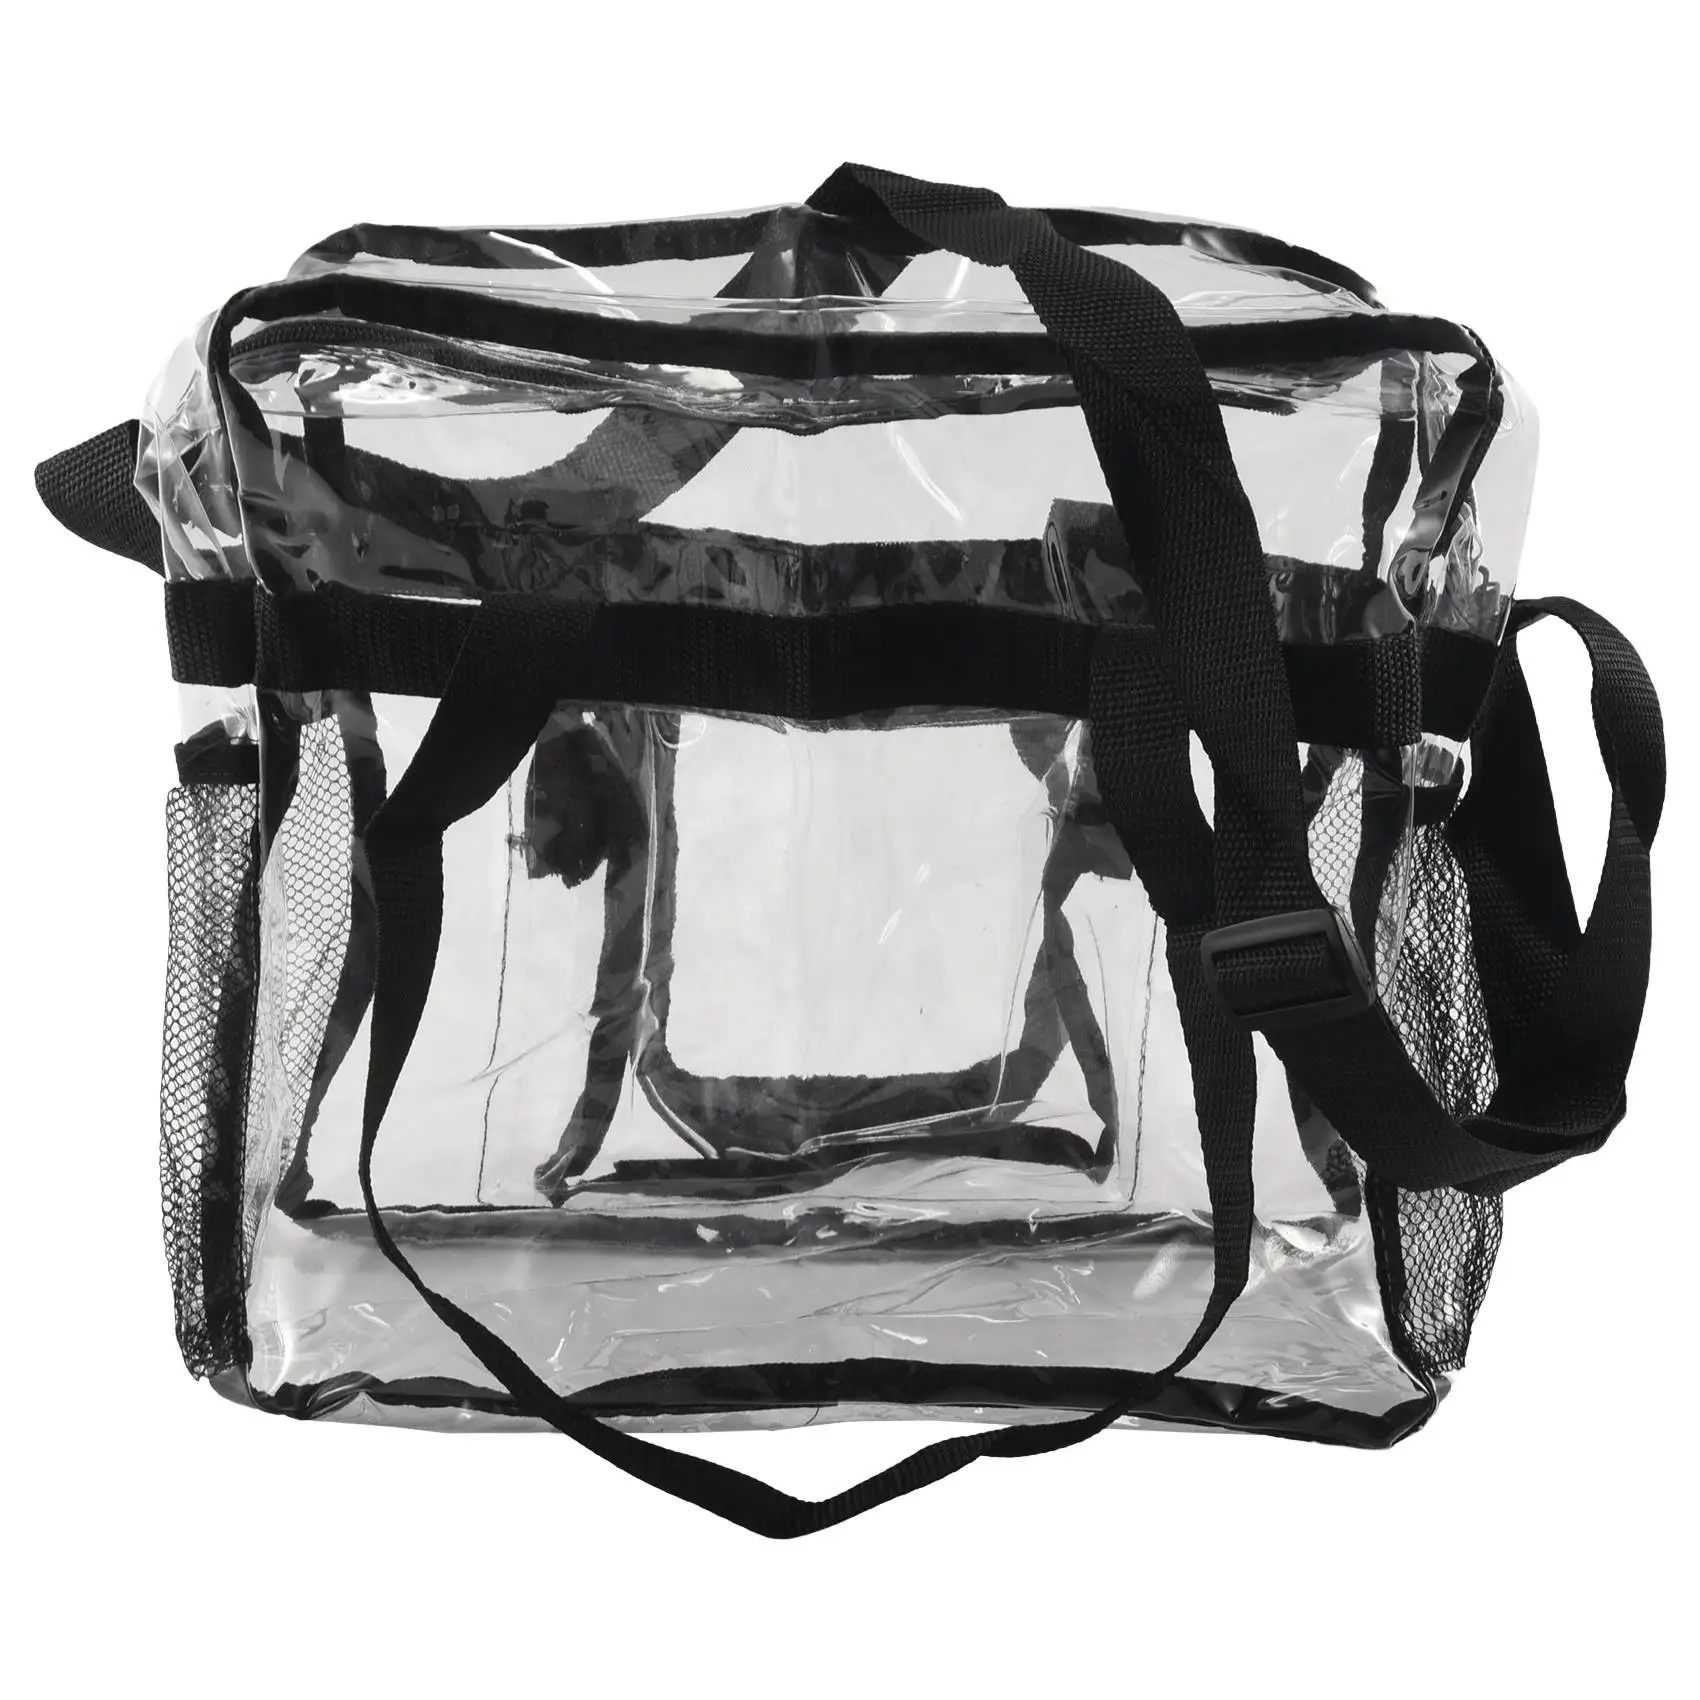 

Transparent Tote Bag Stadium Security Travel and Gym Clear Bag, See Through Tote Bag for Work, Sports Games and Concerts